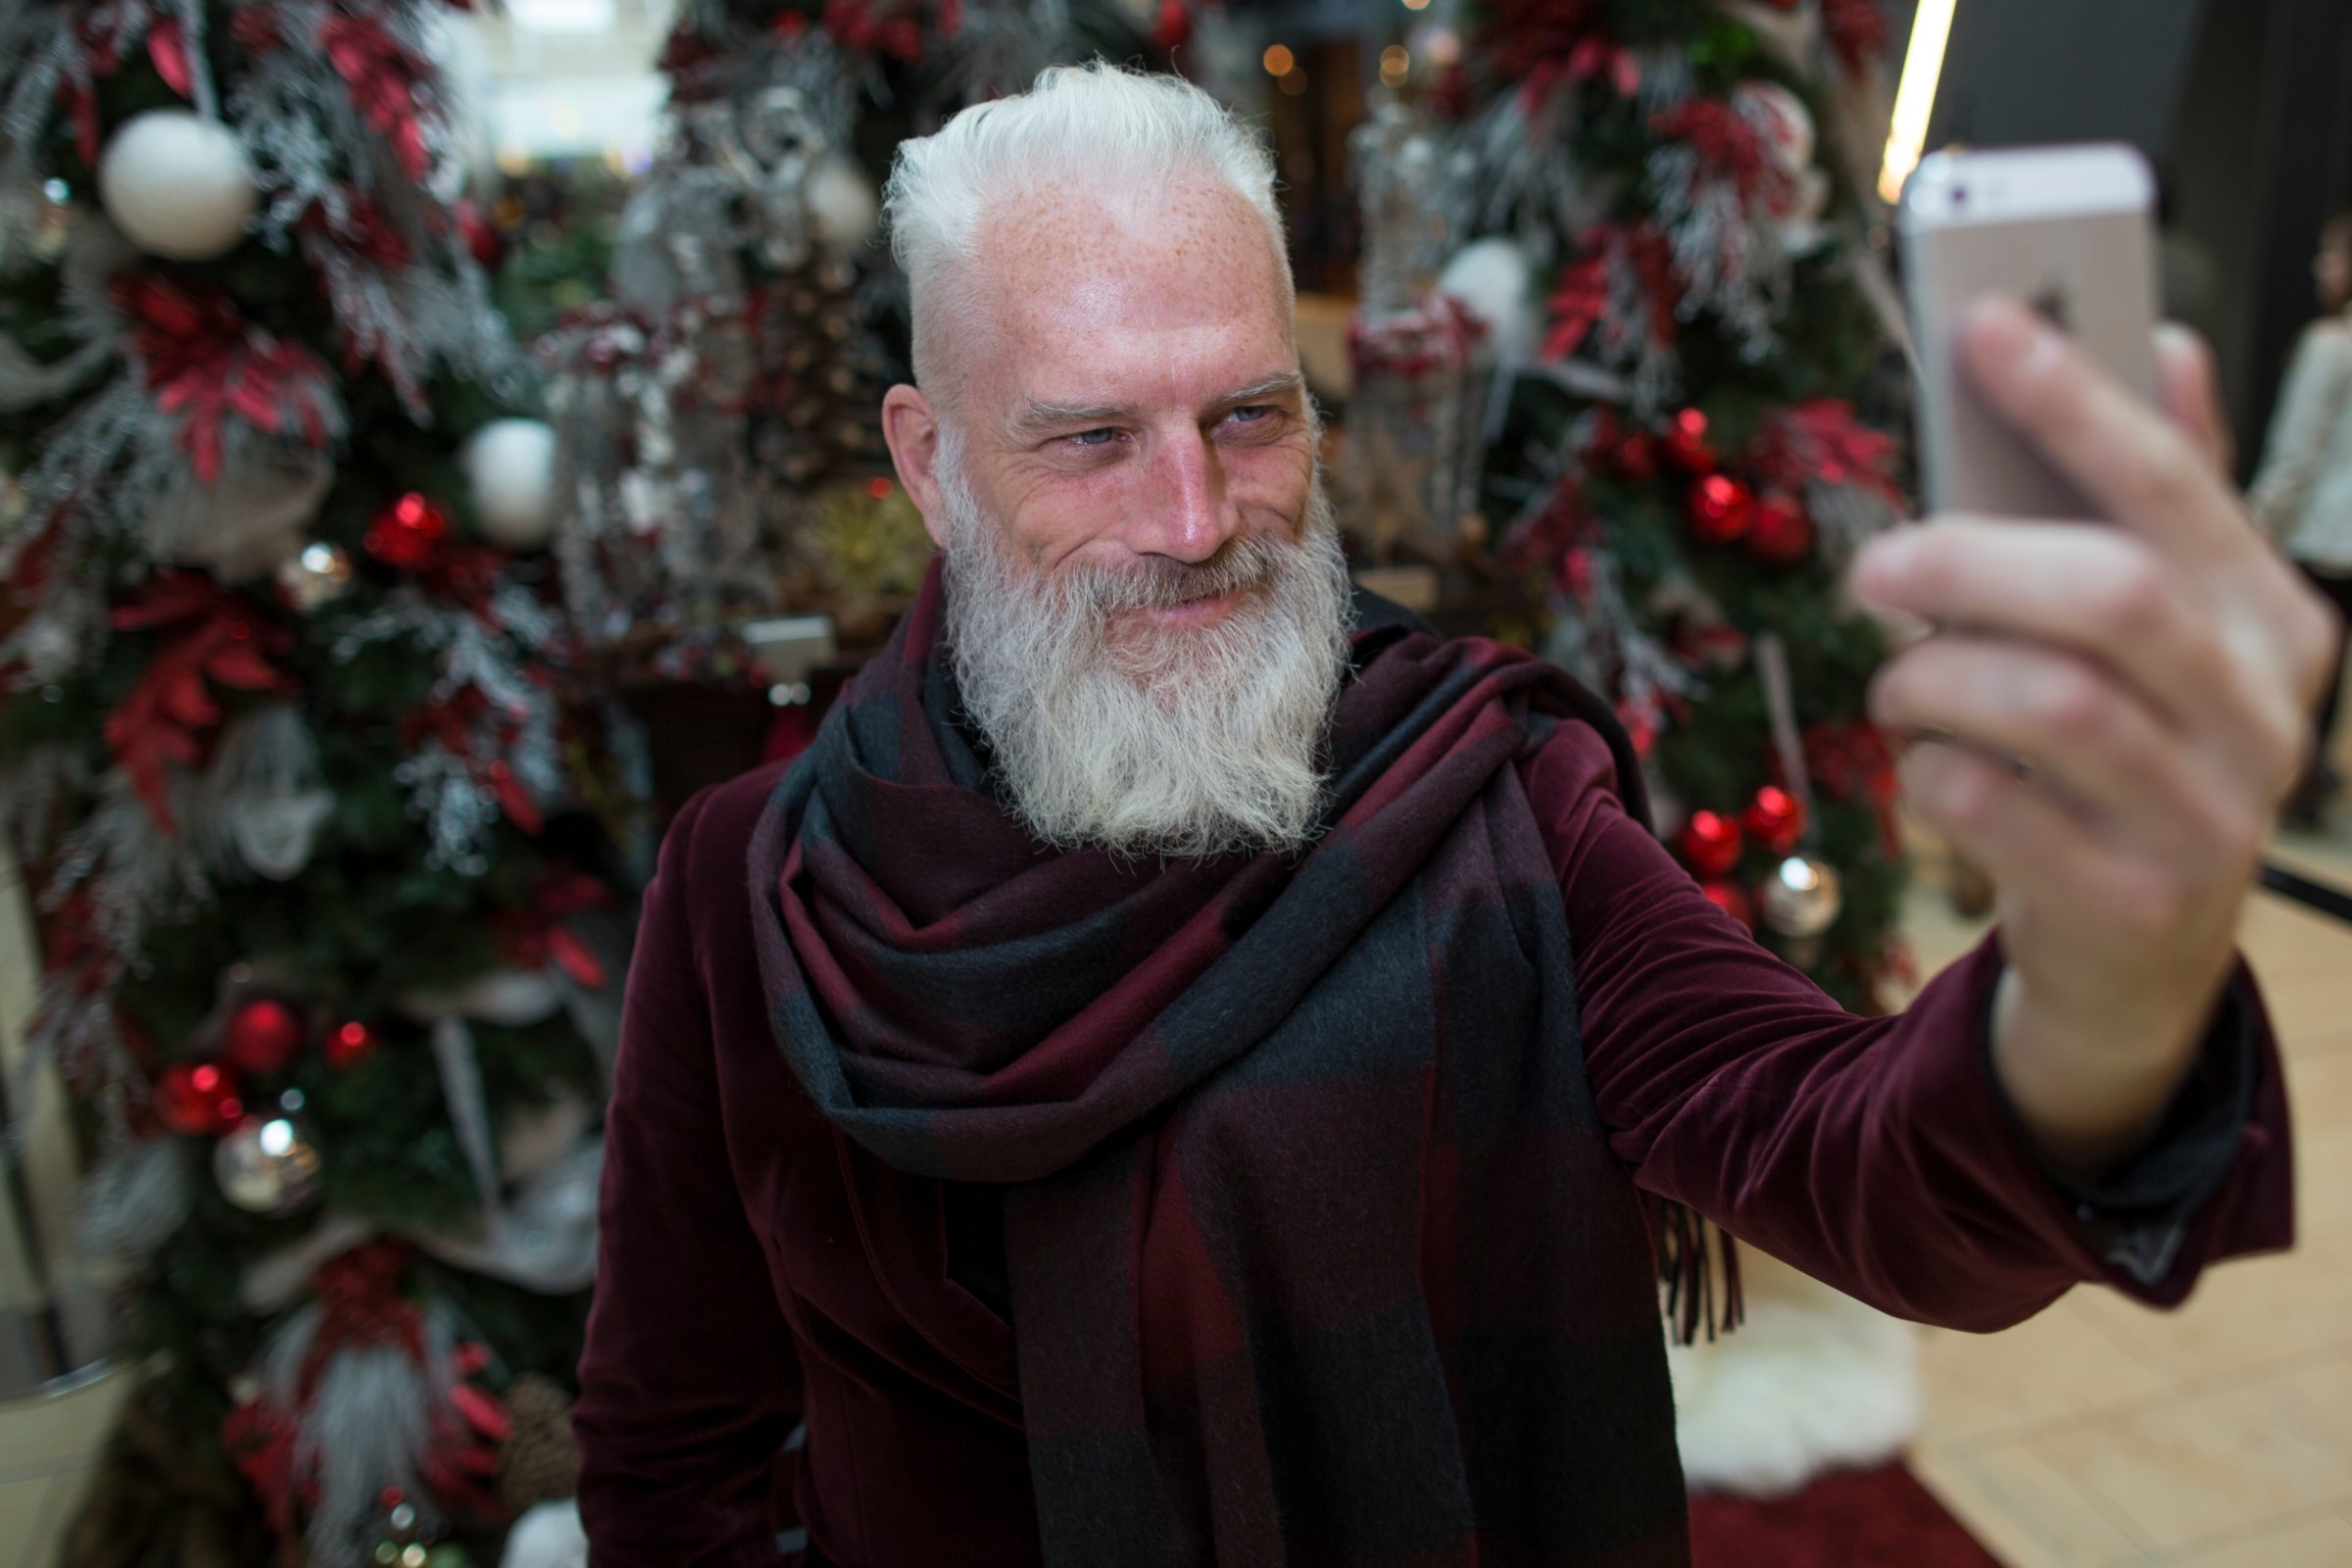 Fashion Santa, Paul Mason, will be working the holiday season at Yorkdale Mall where he will take selfies with mall patrons. All proceeds will go to charity.